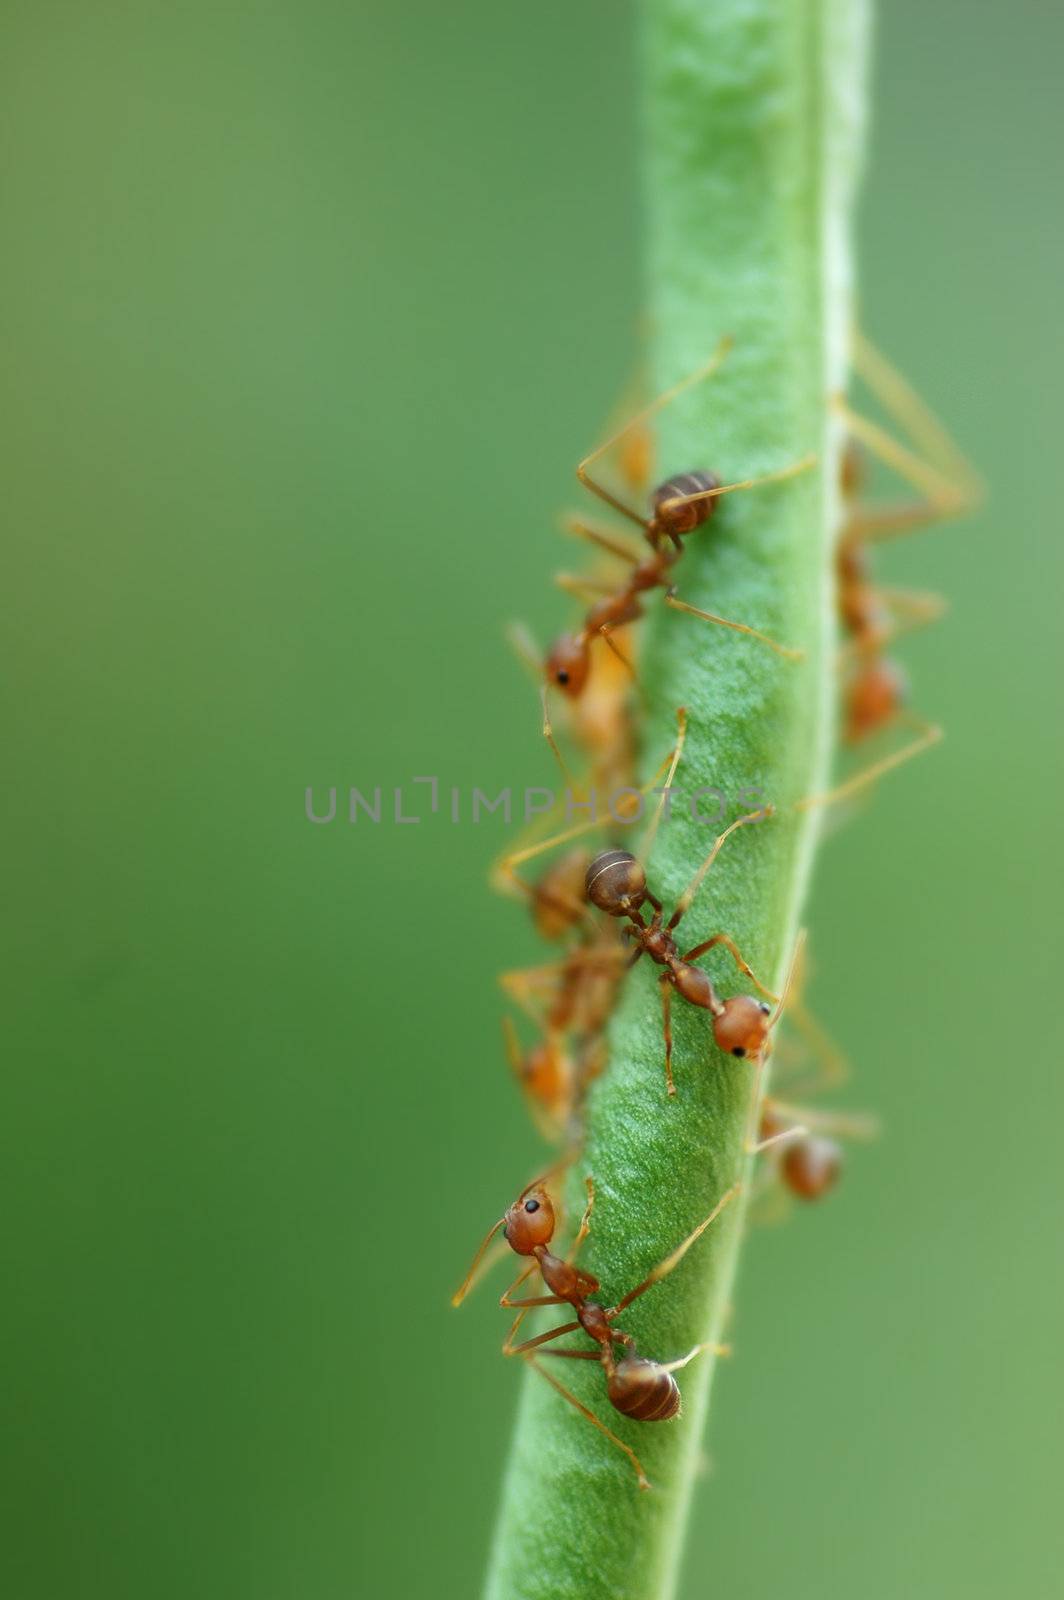 Ants on Bean by khwi